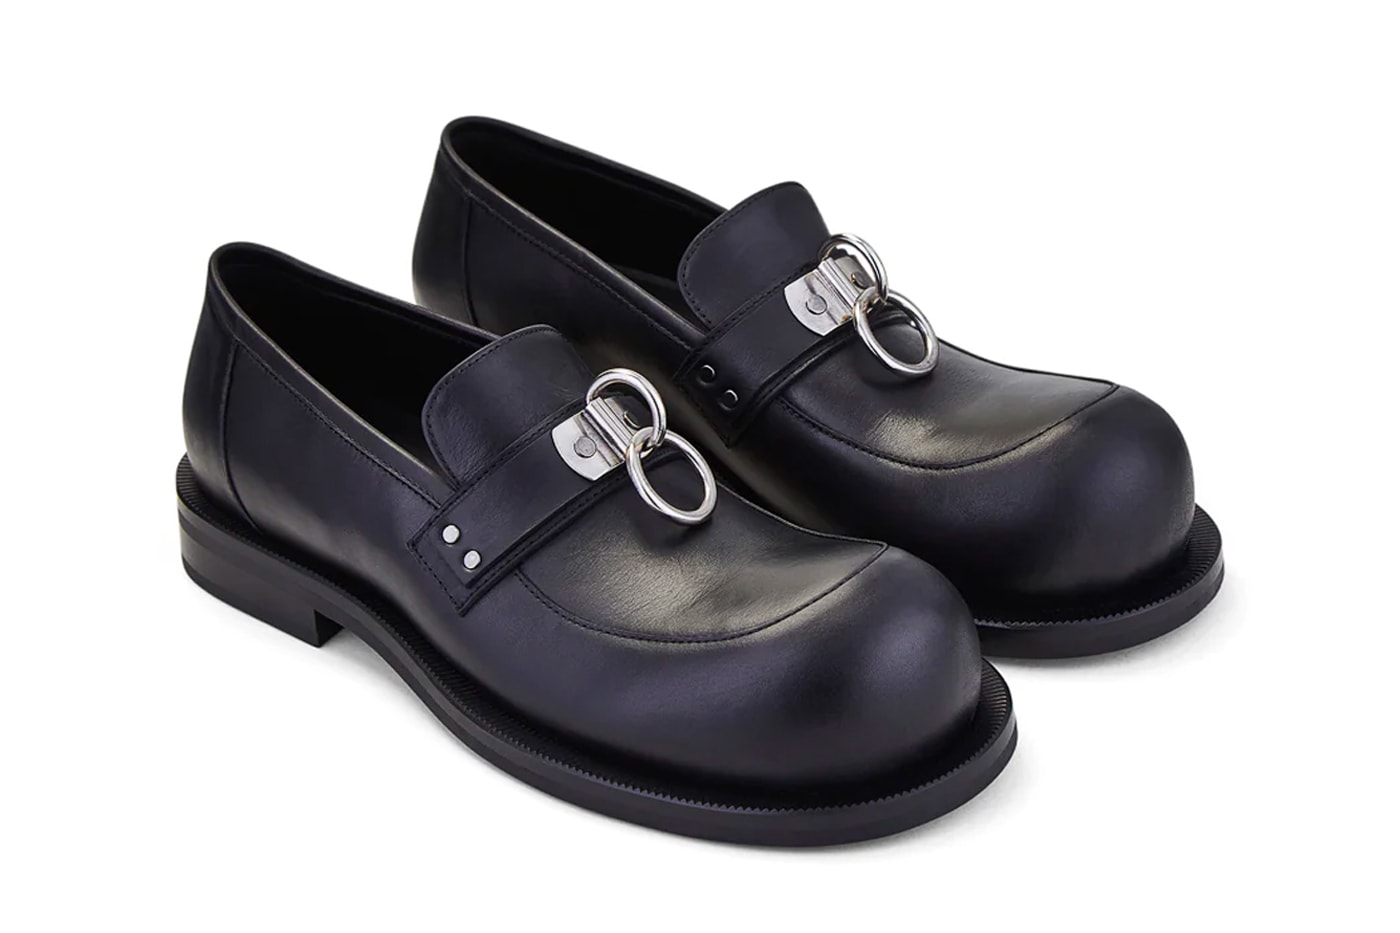 Martine Rose SS23 Bulb Toe Ring Loafers in Black | Hypebeast